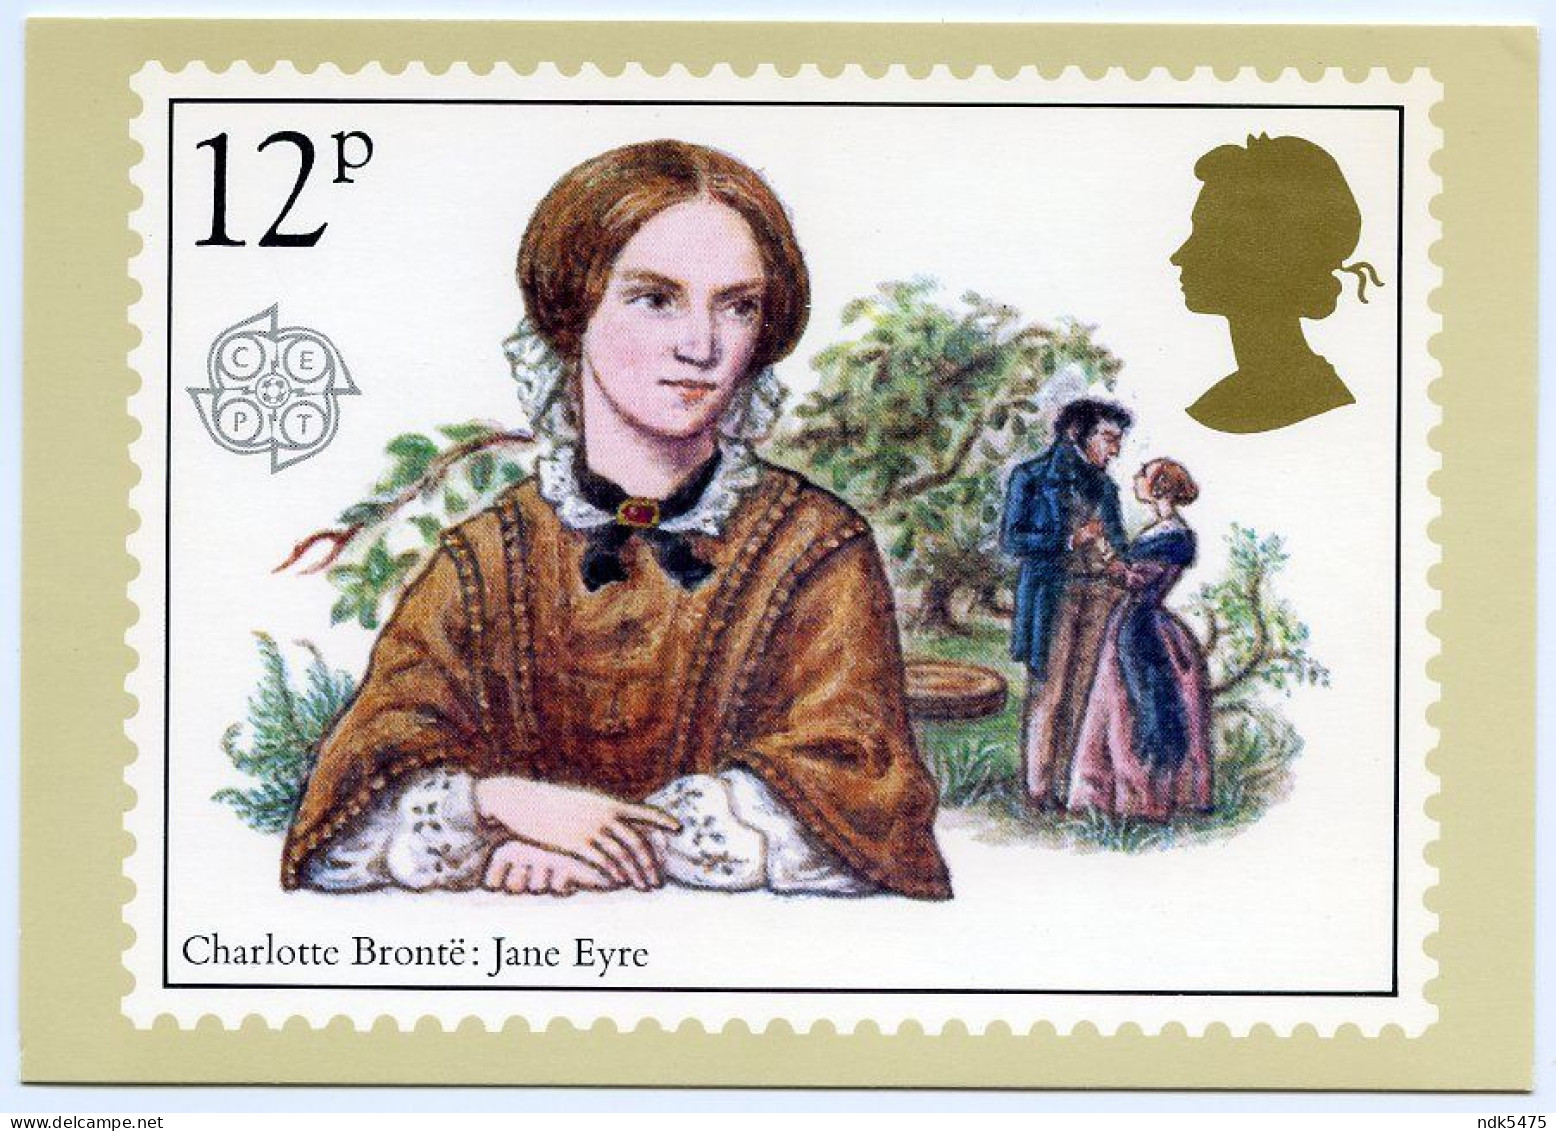 PHQ 1980 : CHARLOTTE BRONTE - JANE EYRE  (10 X 15cms Approx.) - PHQ-Cards